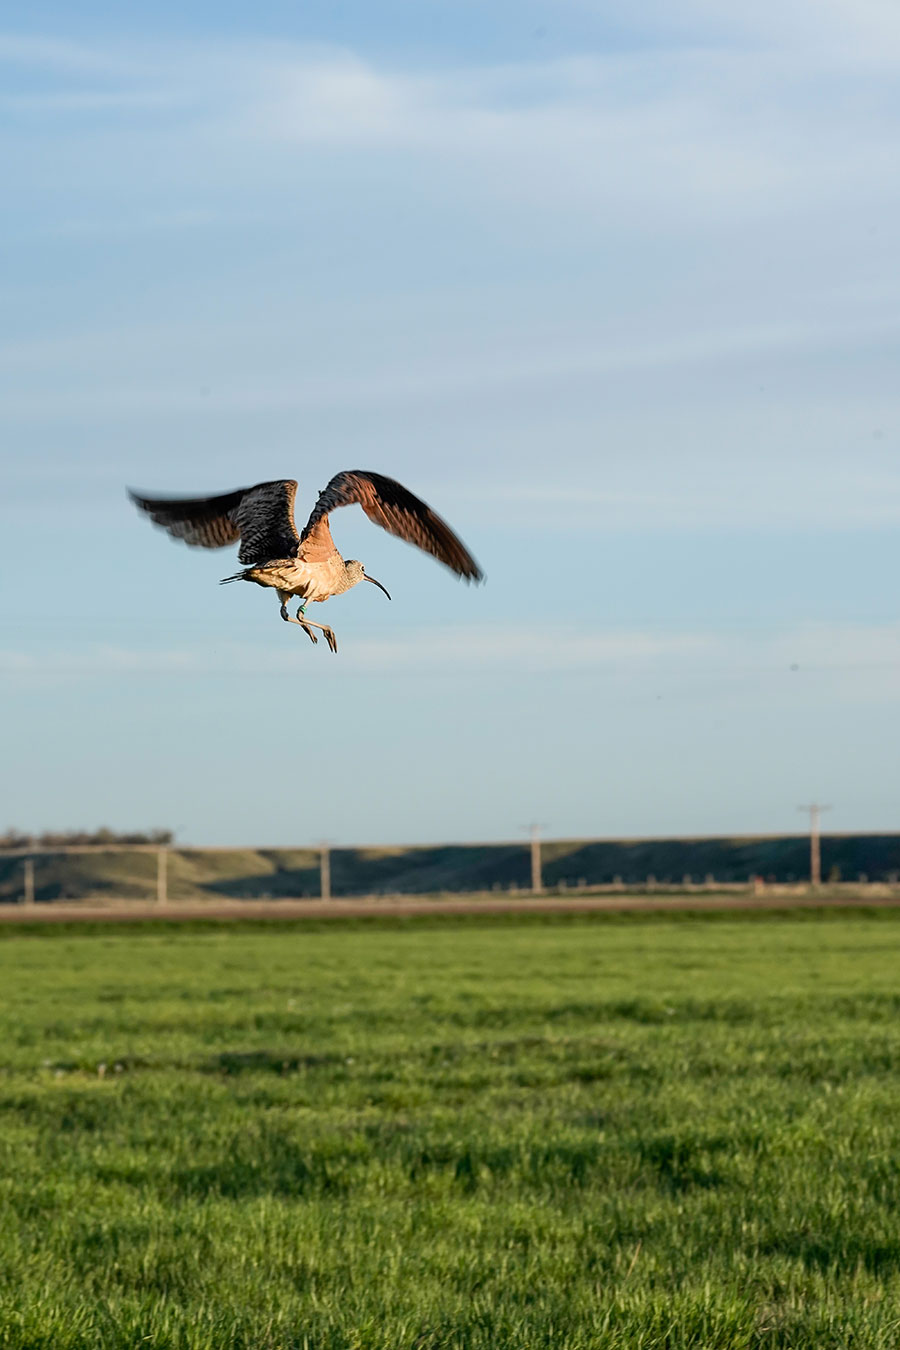 Curlew flying away after having been tagged and equipped with a transmitter